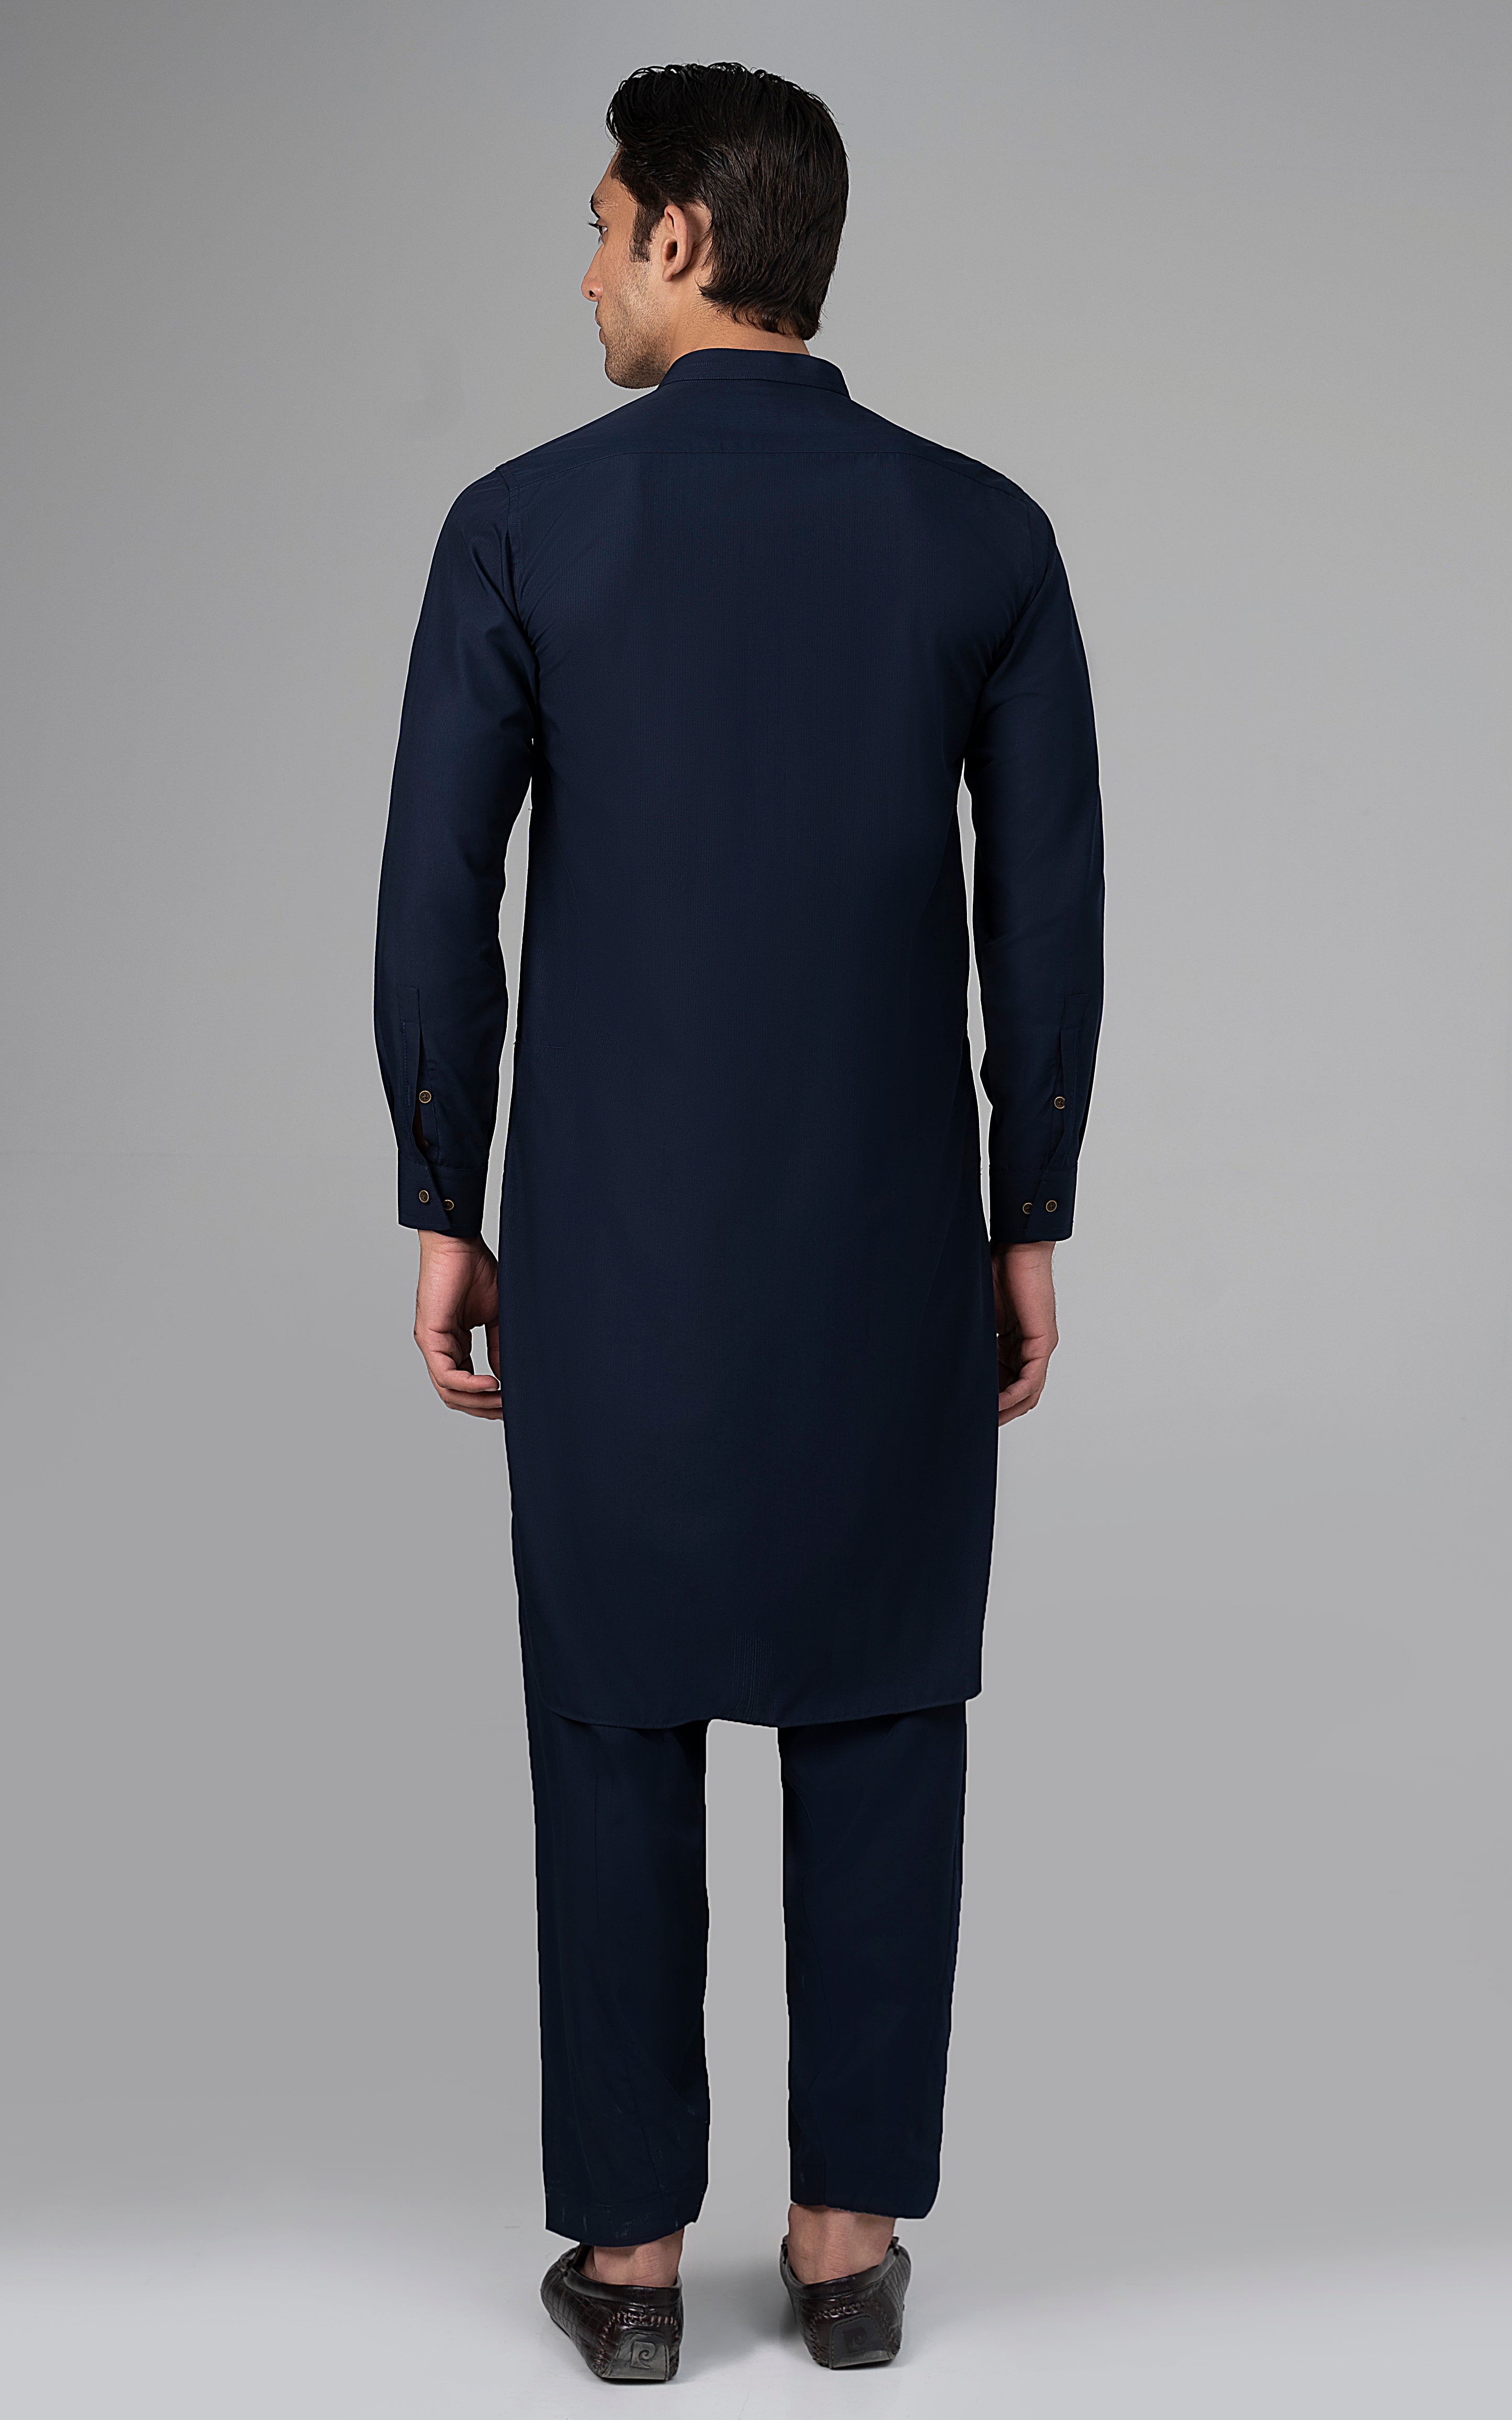 BLENDED WASH & WEAR - SIGNATURE COLLECTION NAVY